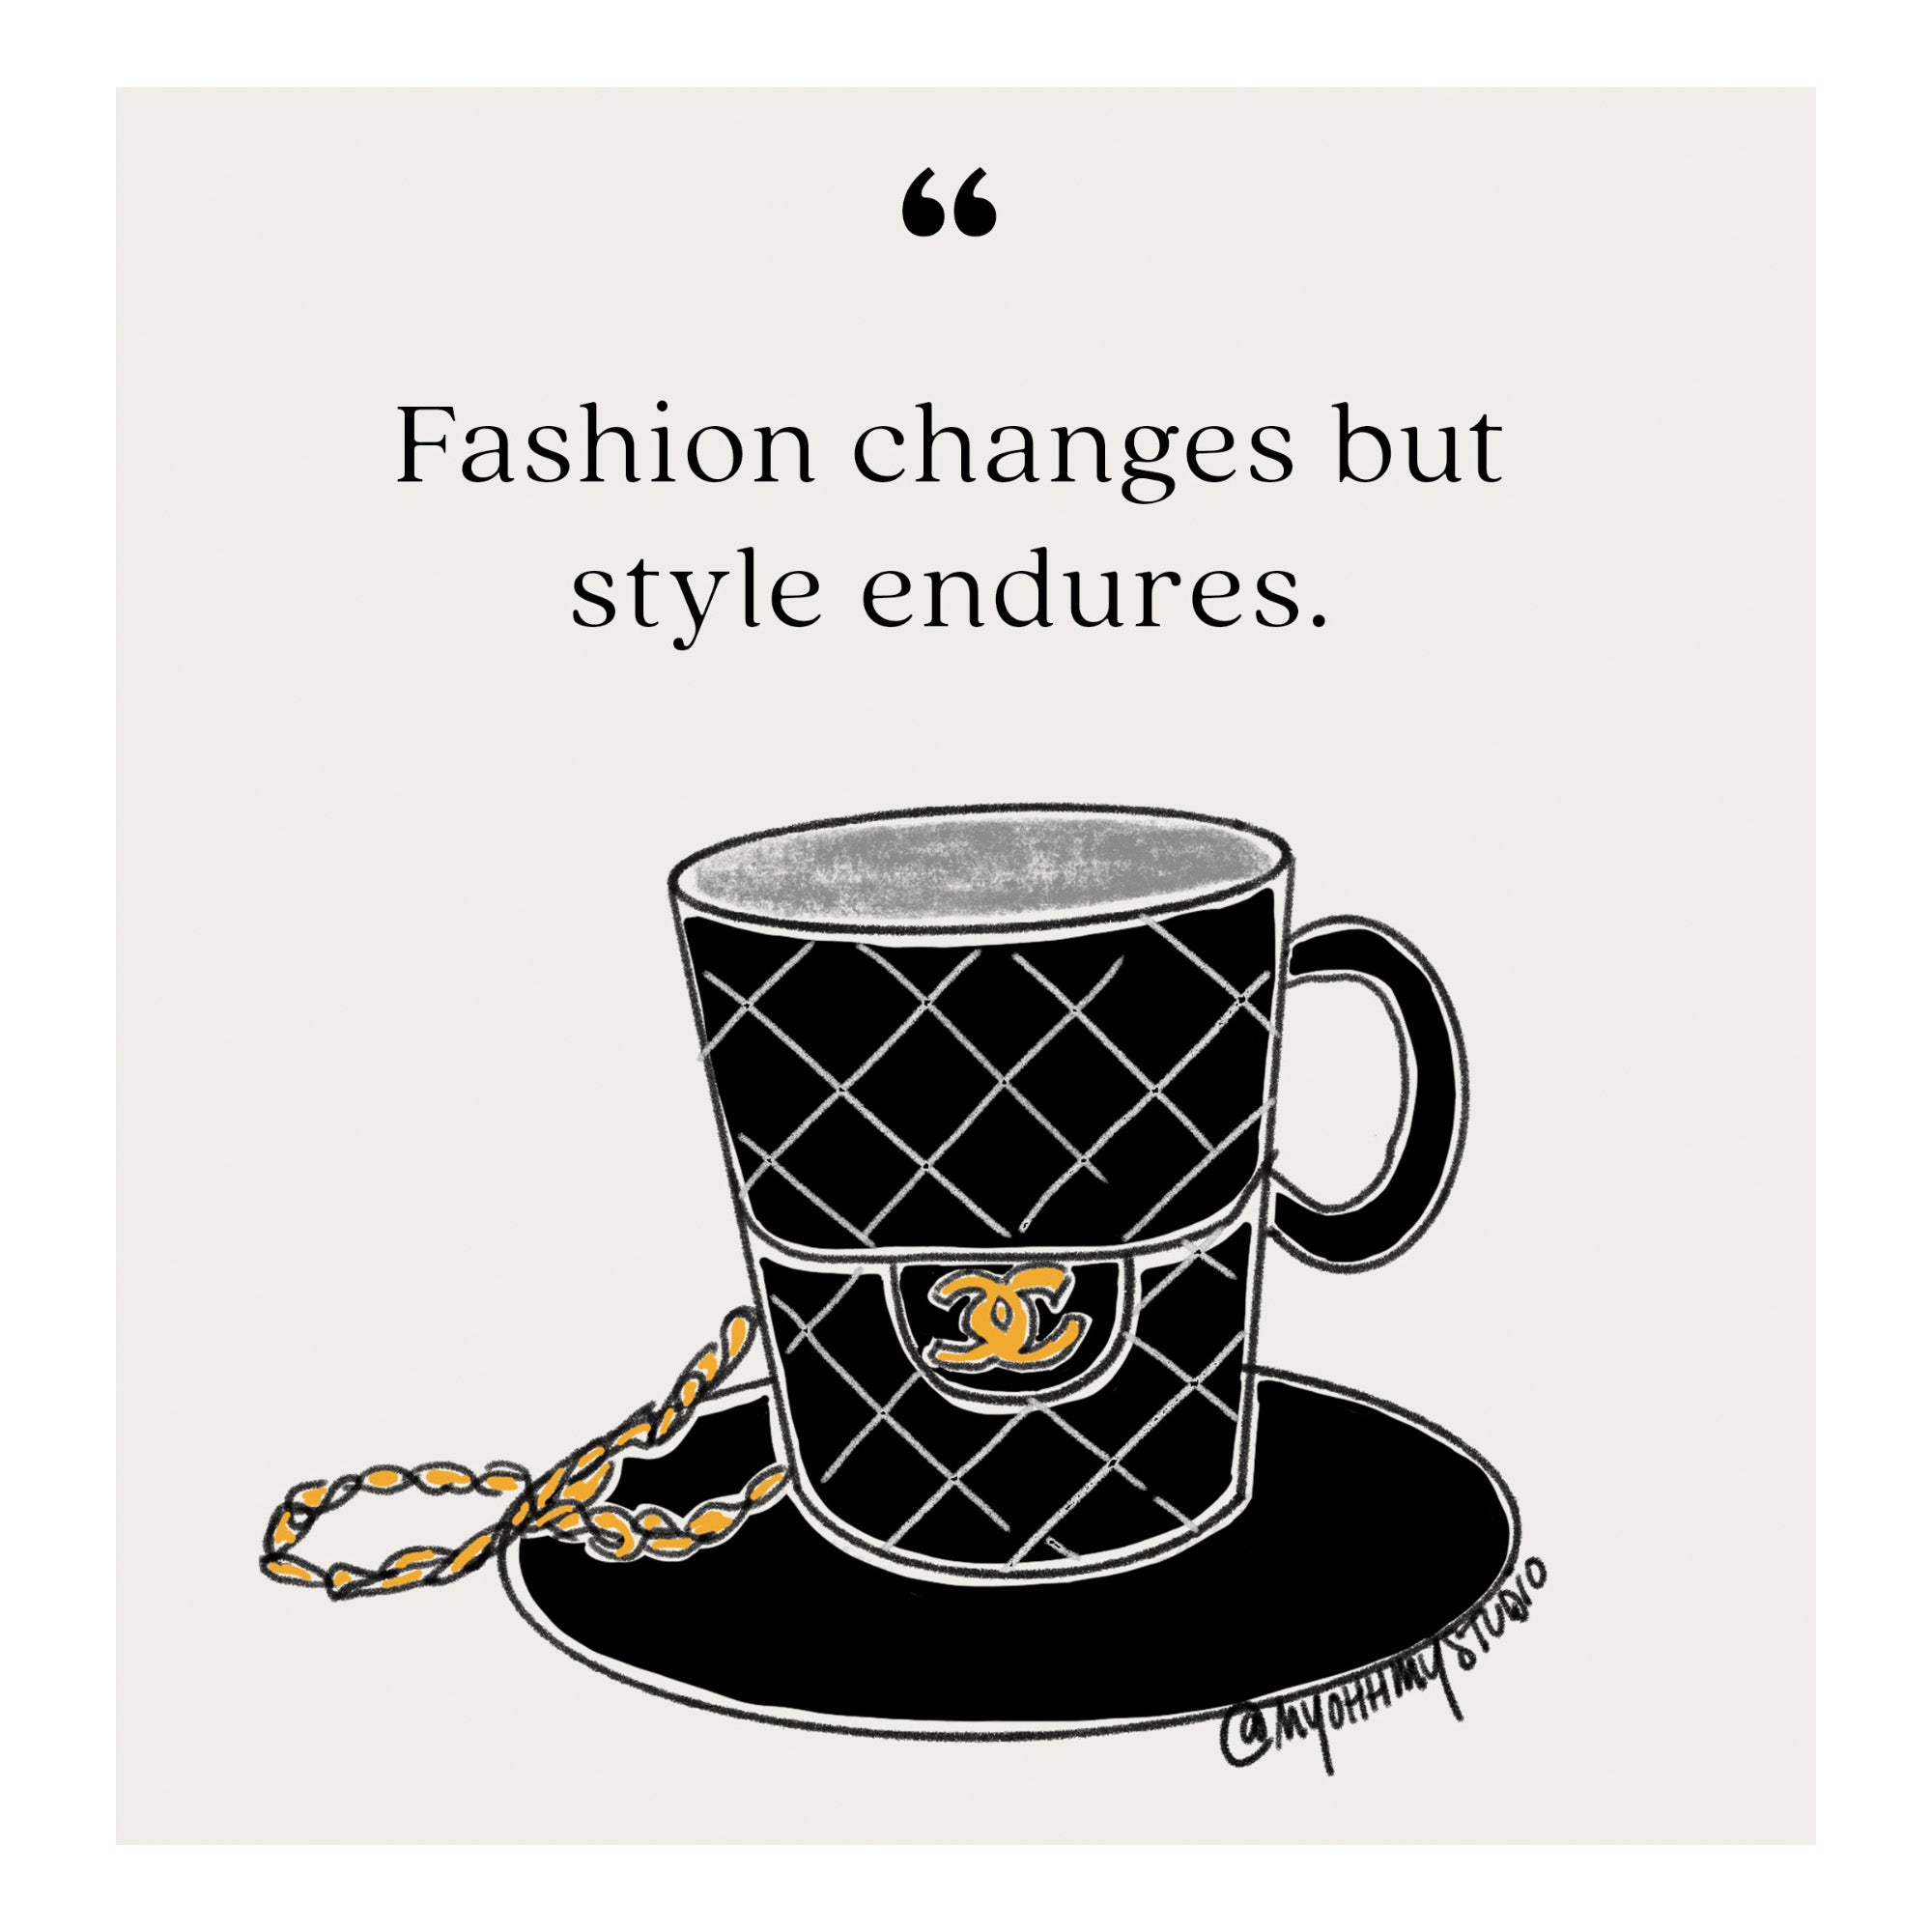 "Fashion changes but style endures" Print